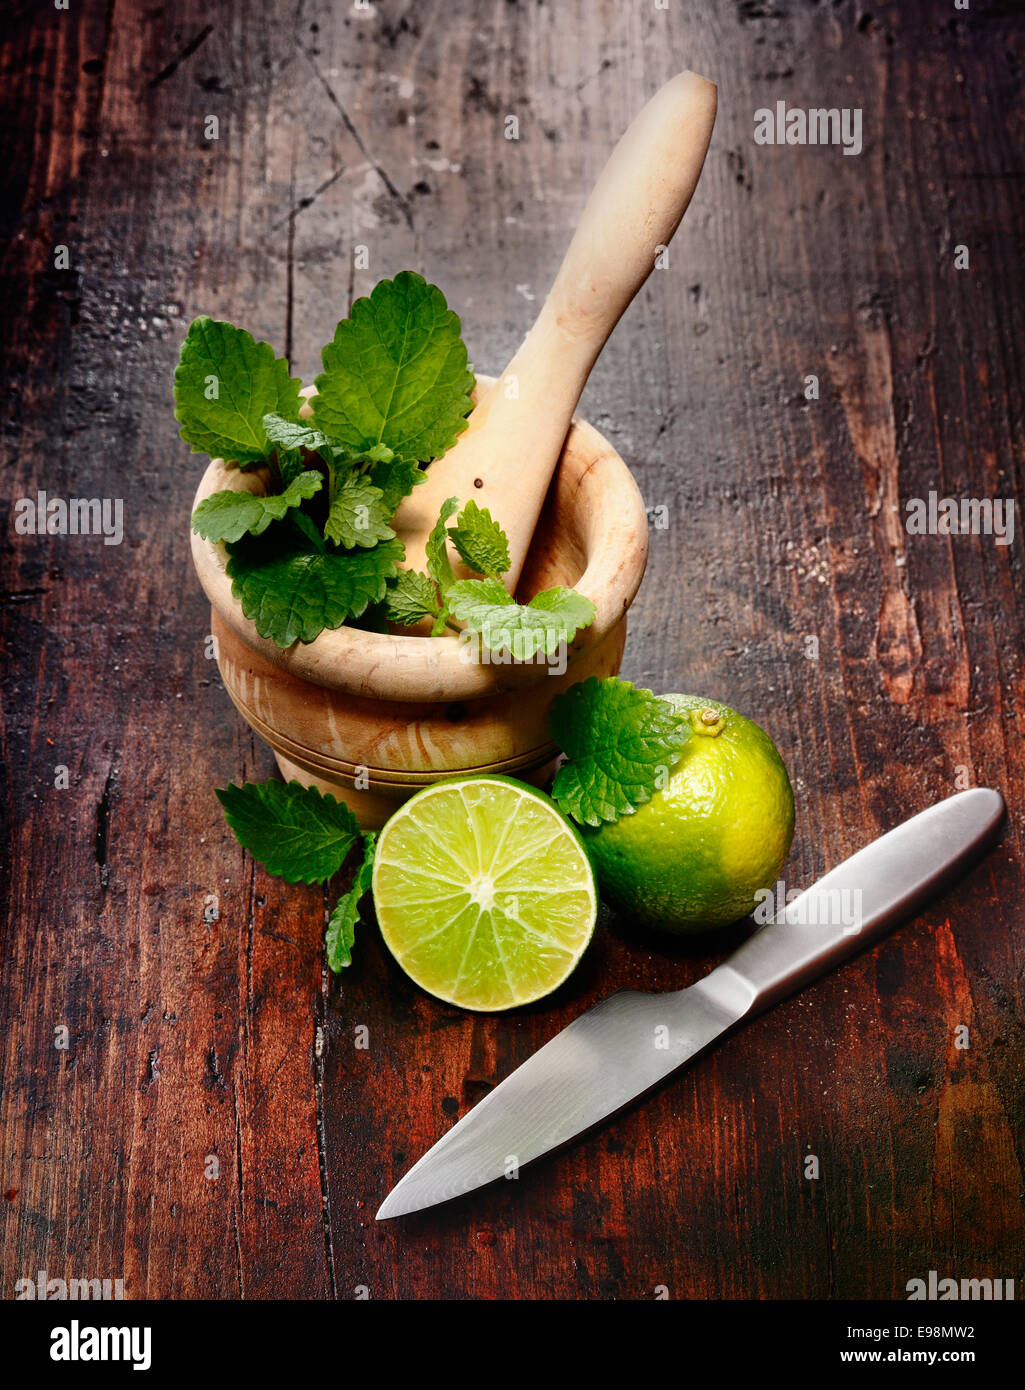 Mortar, Limes and Peppermint on a wood Background. Ingredients for Caipirinha and Mojito Cocktails and other drinks Stock Photo